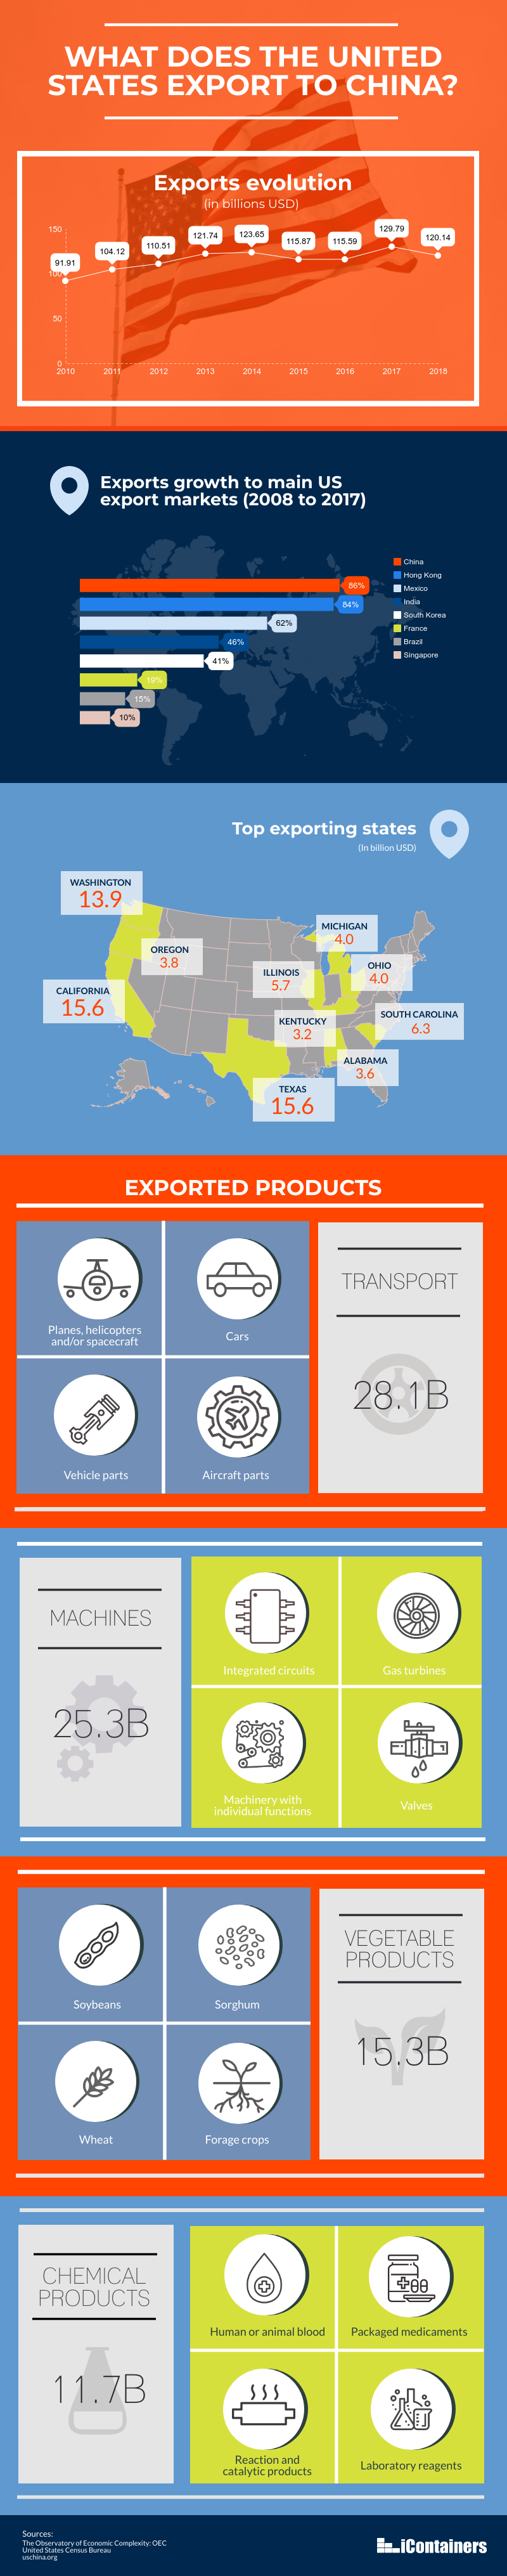 us-exports-to-china-infographic2.png